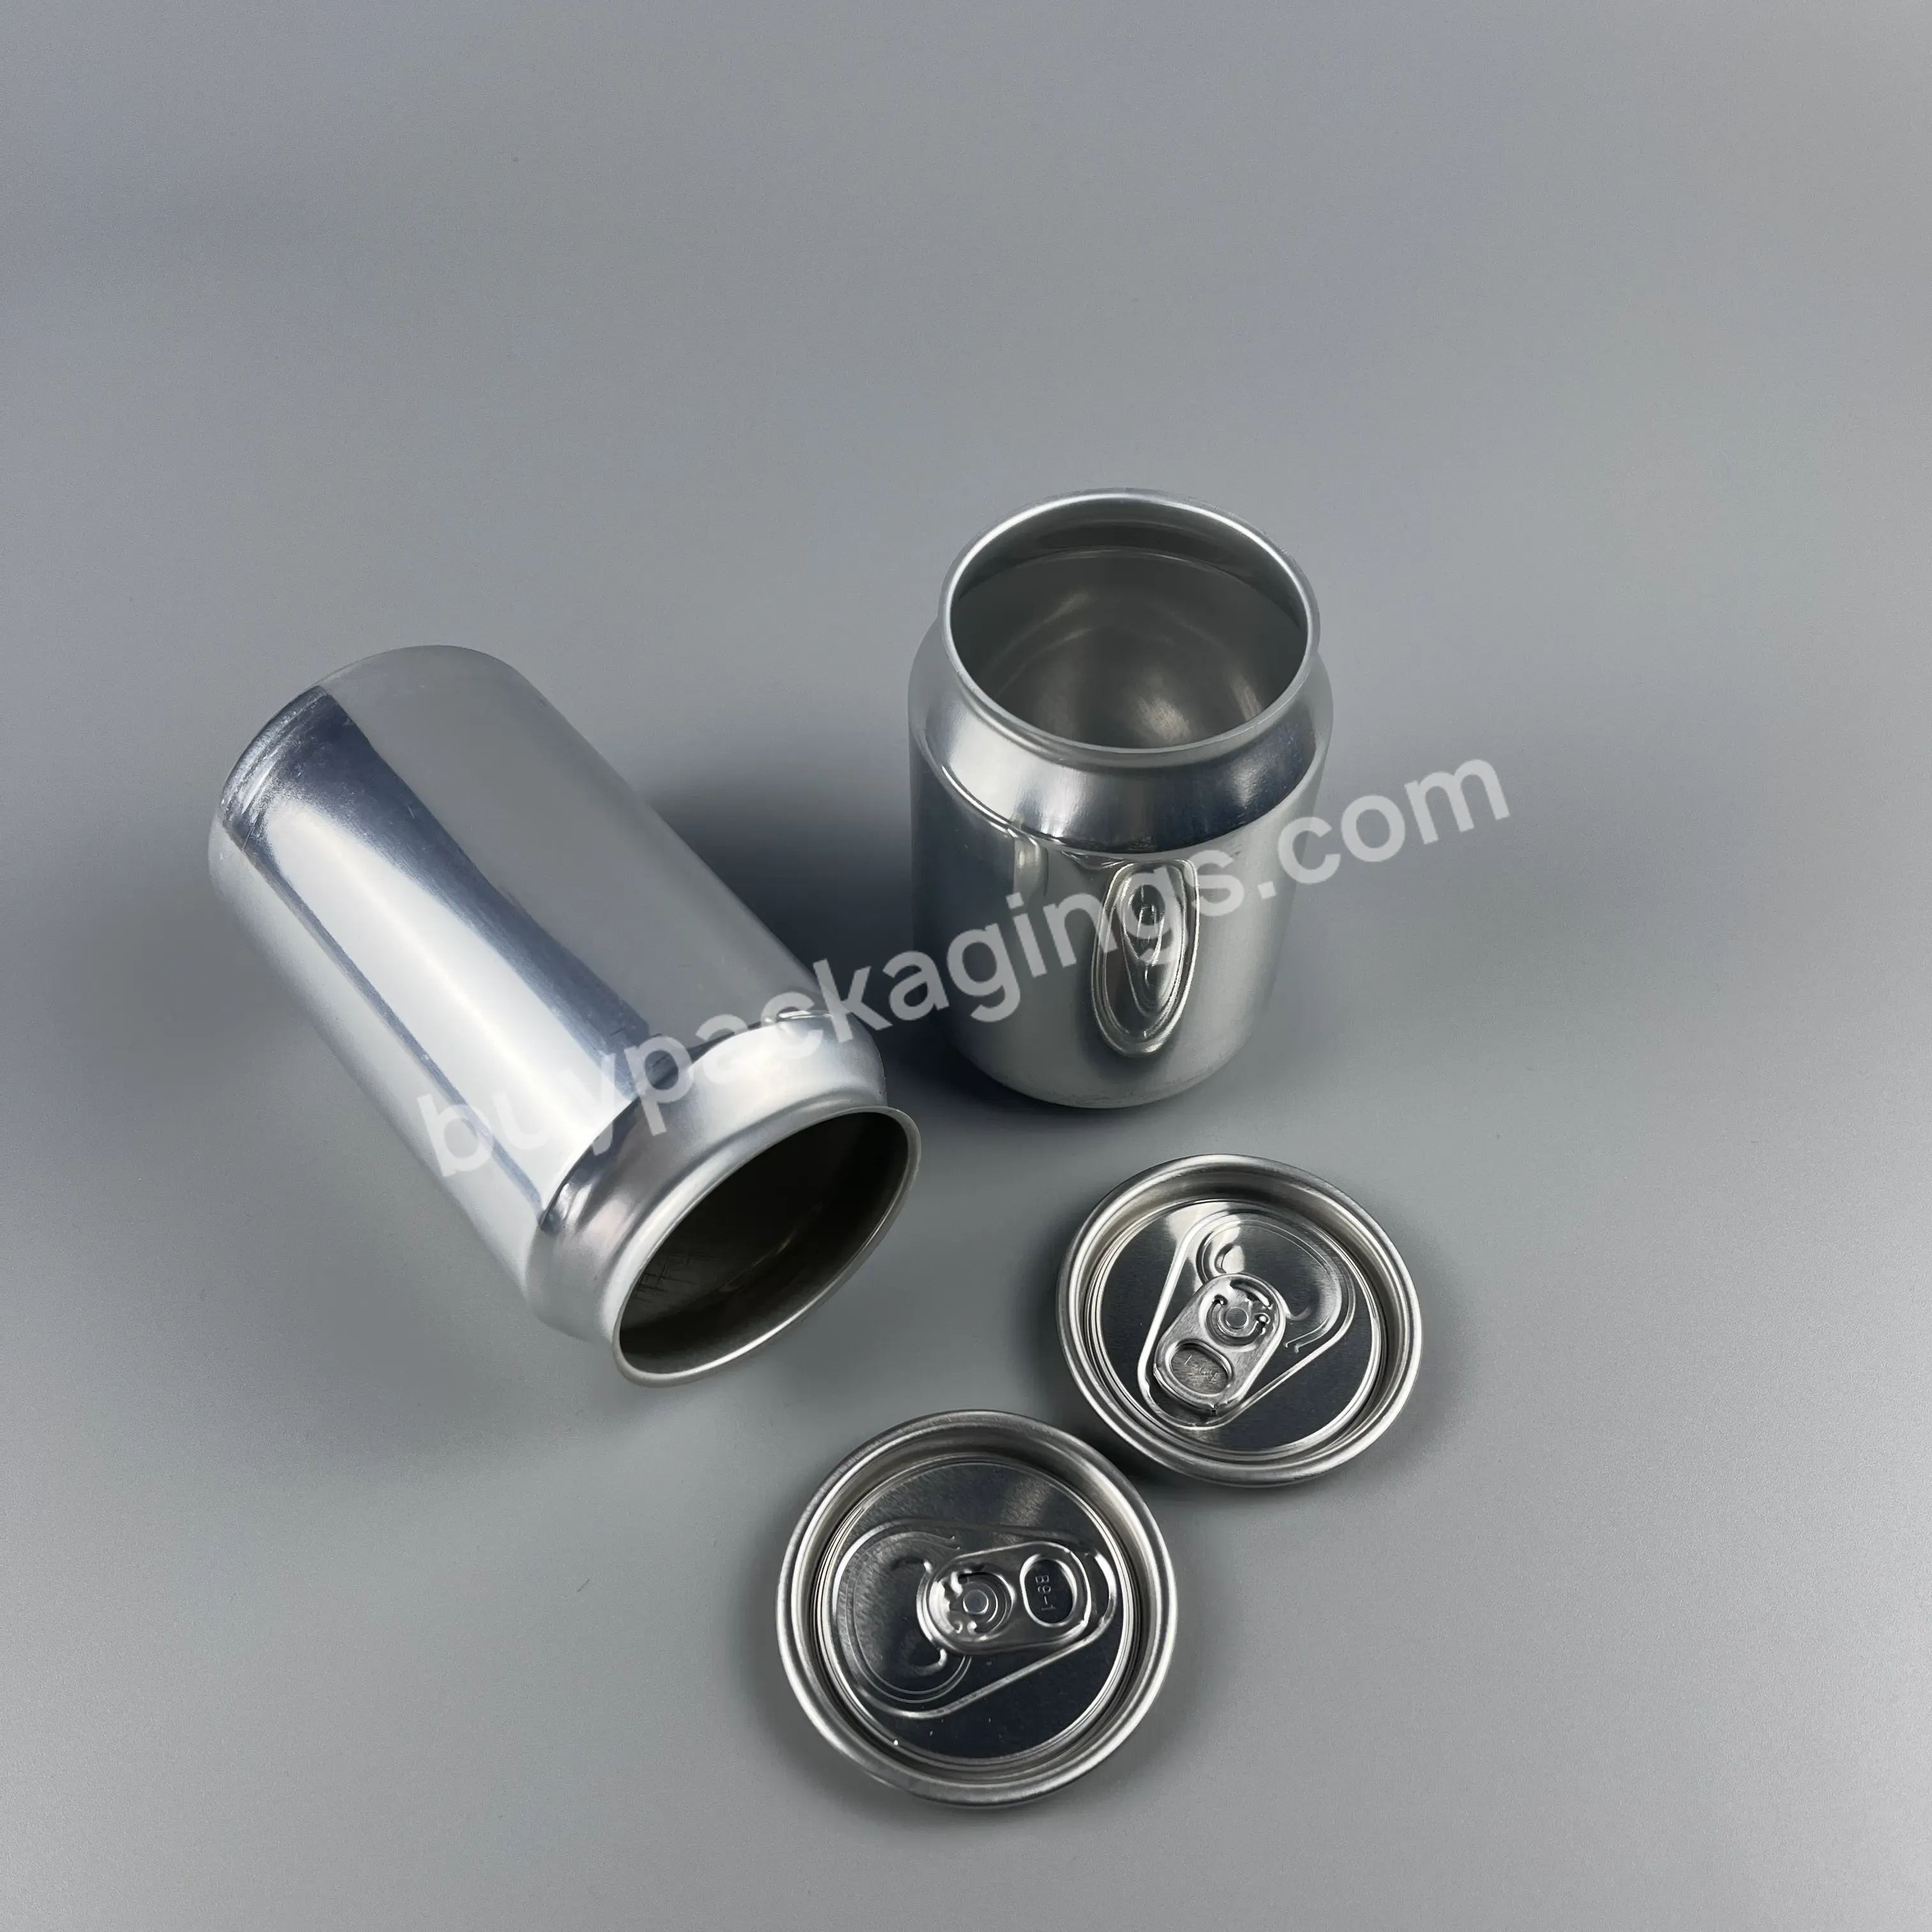 Wholesale Standard 250ml Empty Drink Energy Aluminum Cans Custom Size Smooth Soda Cans Stubby Metal Bottles - Buy Aluminum Pop Can,250mlpop Can Bottle Drinking Juice Bottle With Aluminum Lid,Soda Drink Cans.